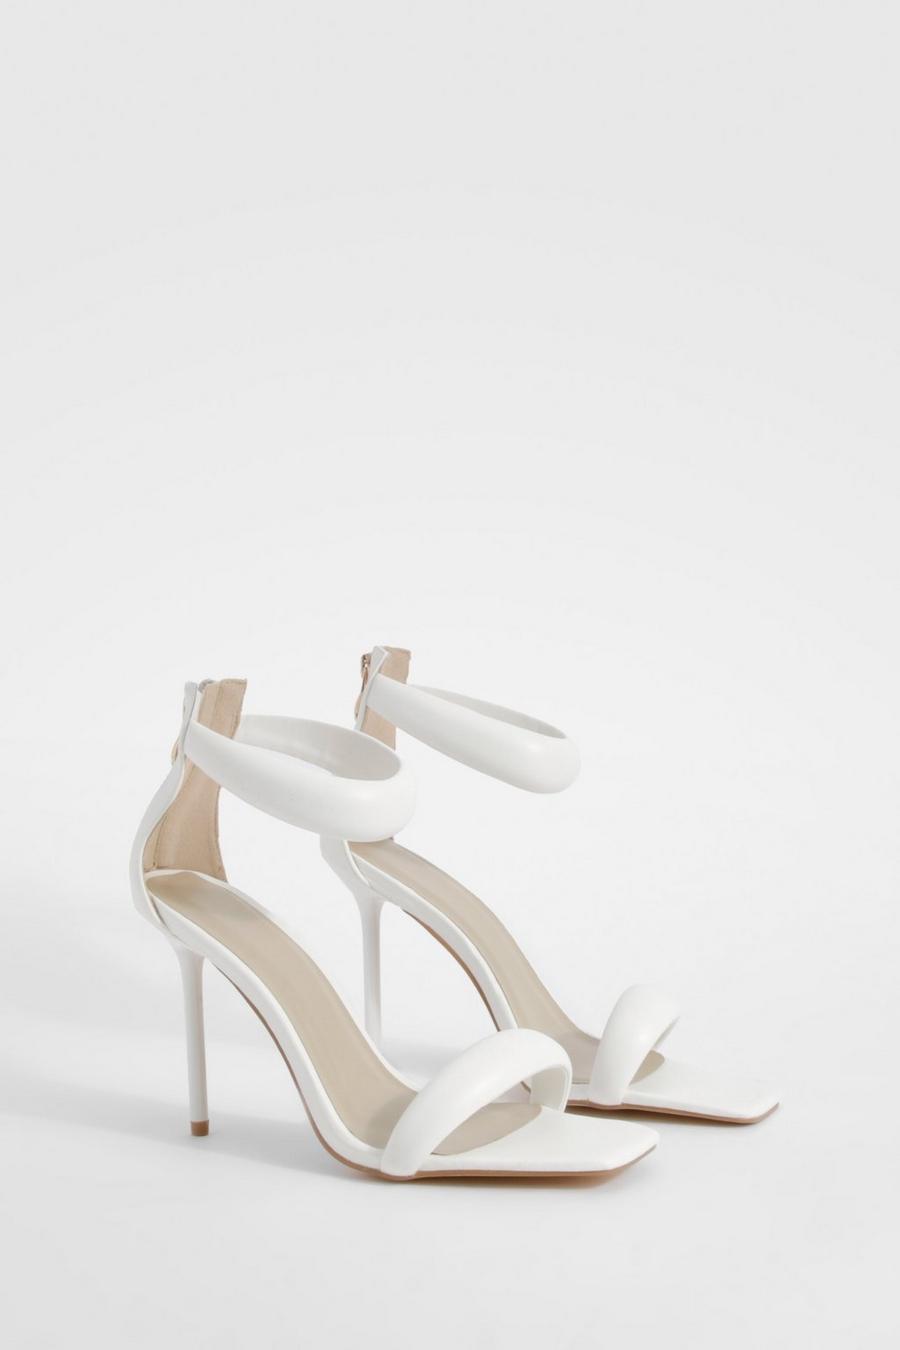 Barely There Heels | Ankle Strap & Barely There Sandals | boohoo UK